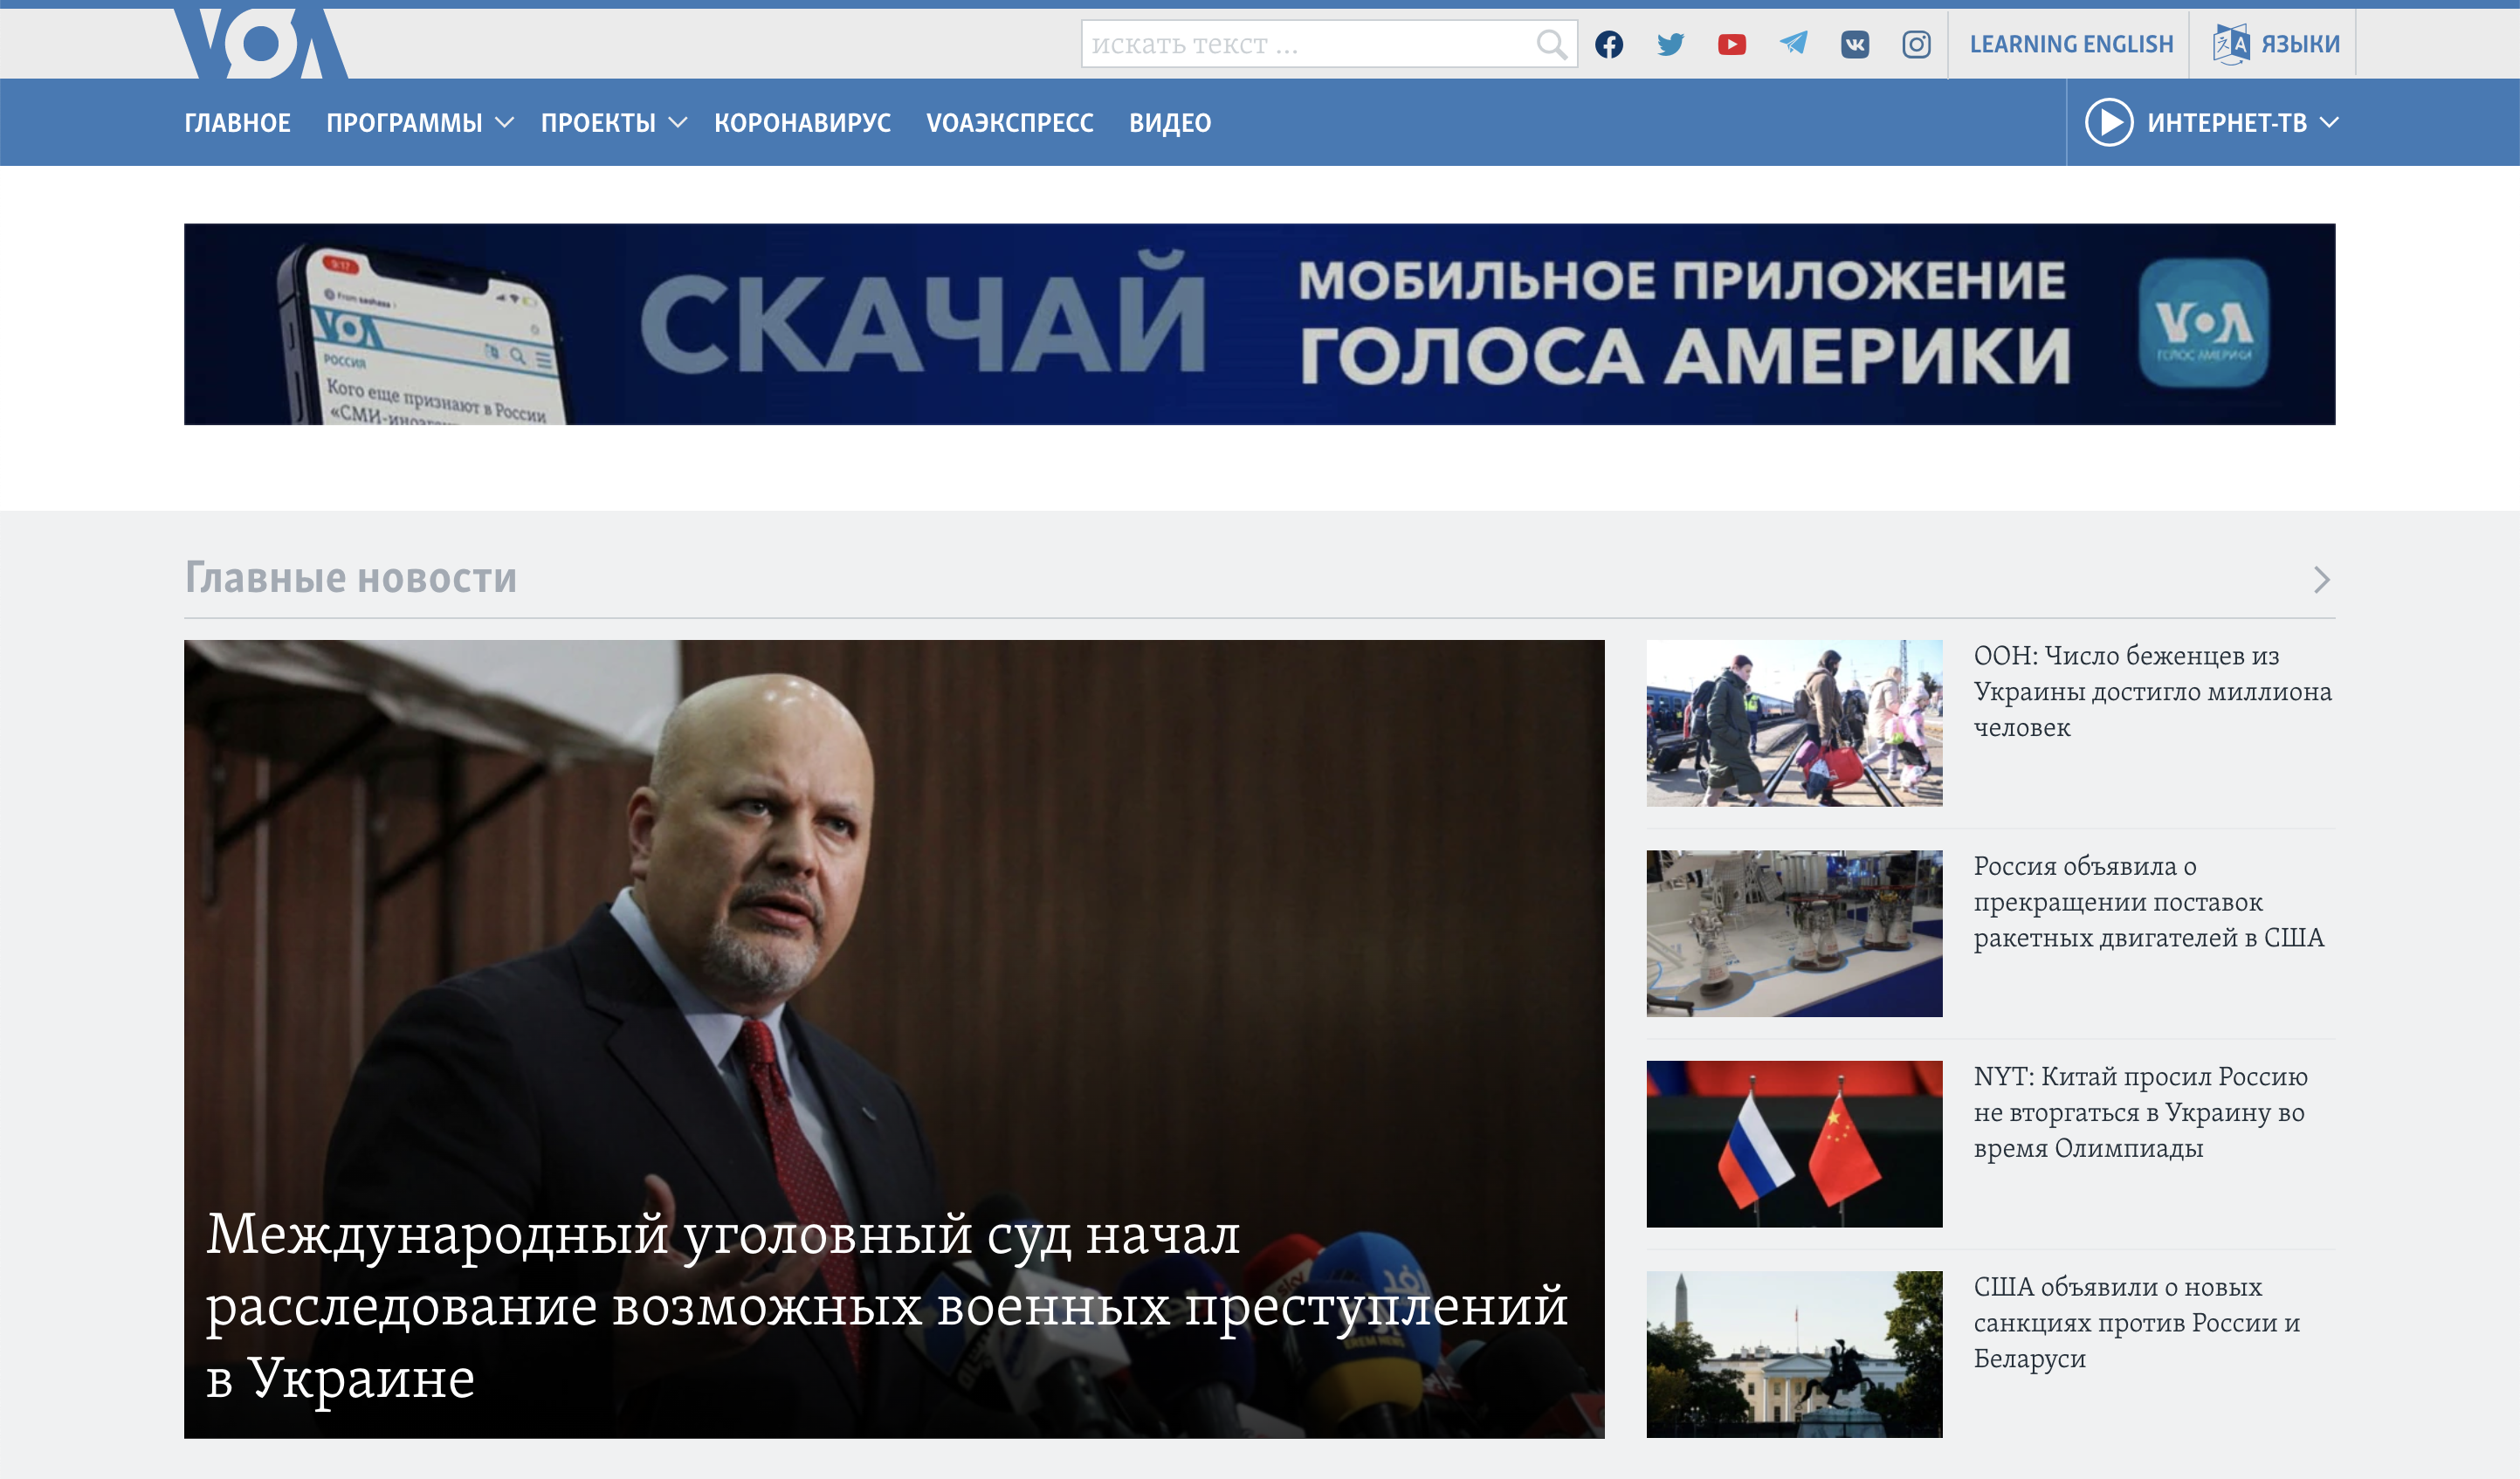 VOA responds to Russian government plans to block VOA Russian website